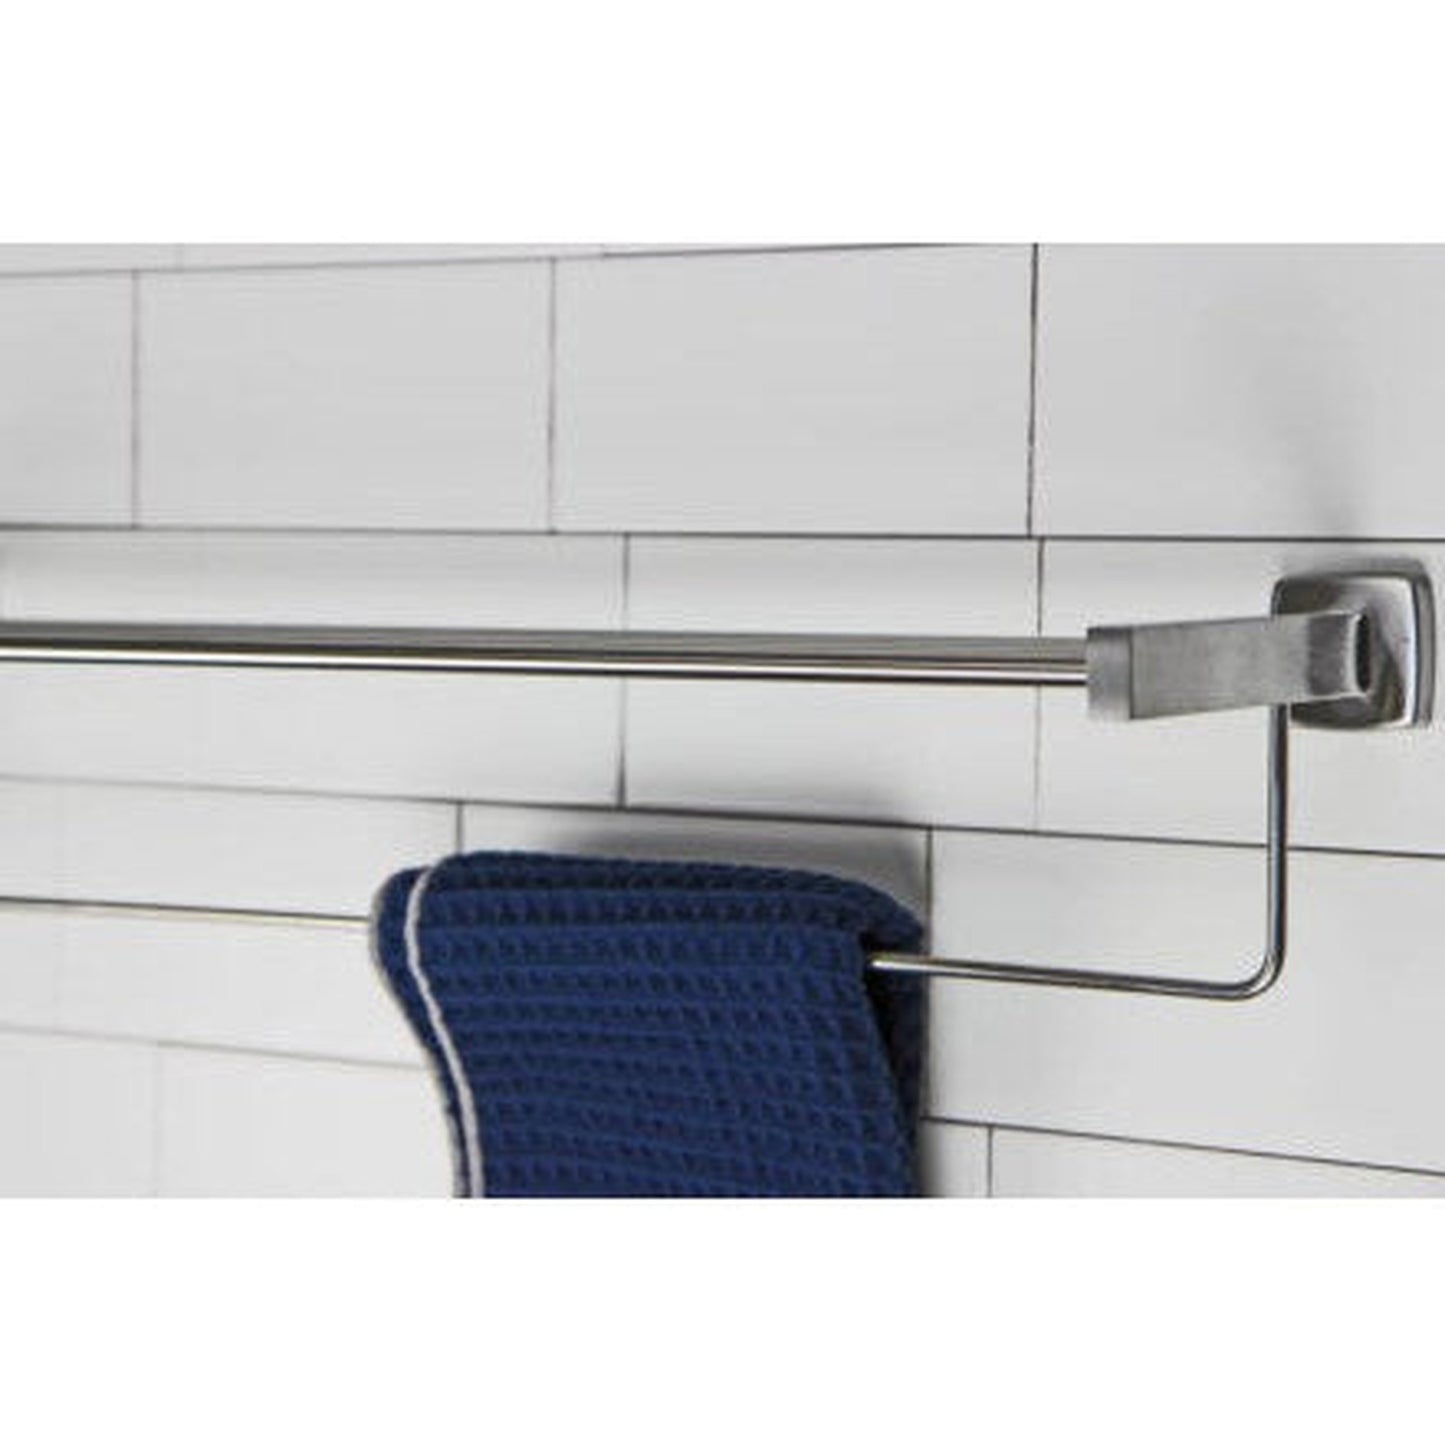 Frost 25.38 x 8.25 x 5.5 Stainless Steel Brushed Towel Rack